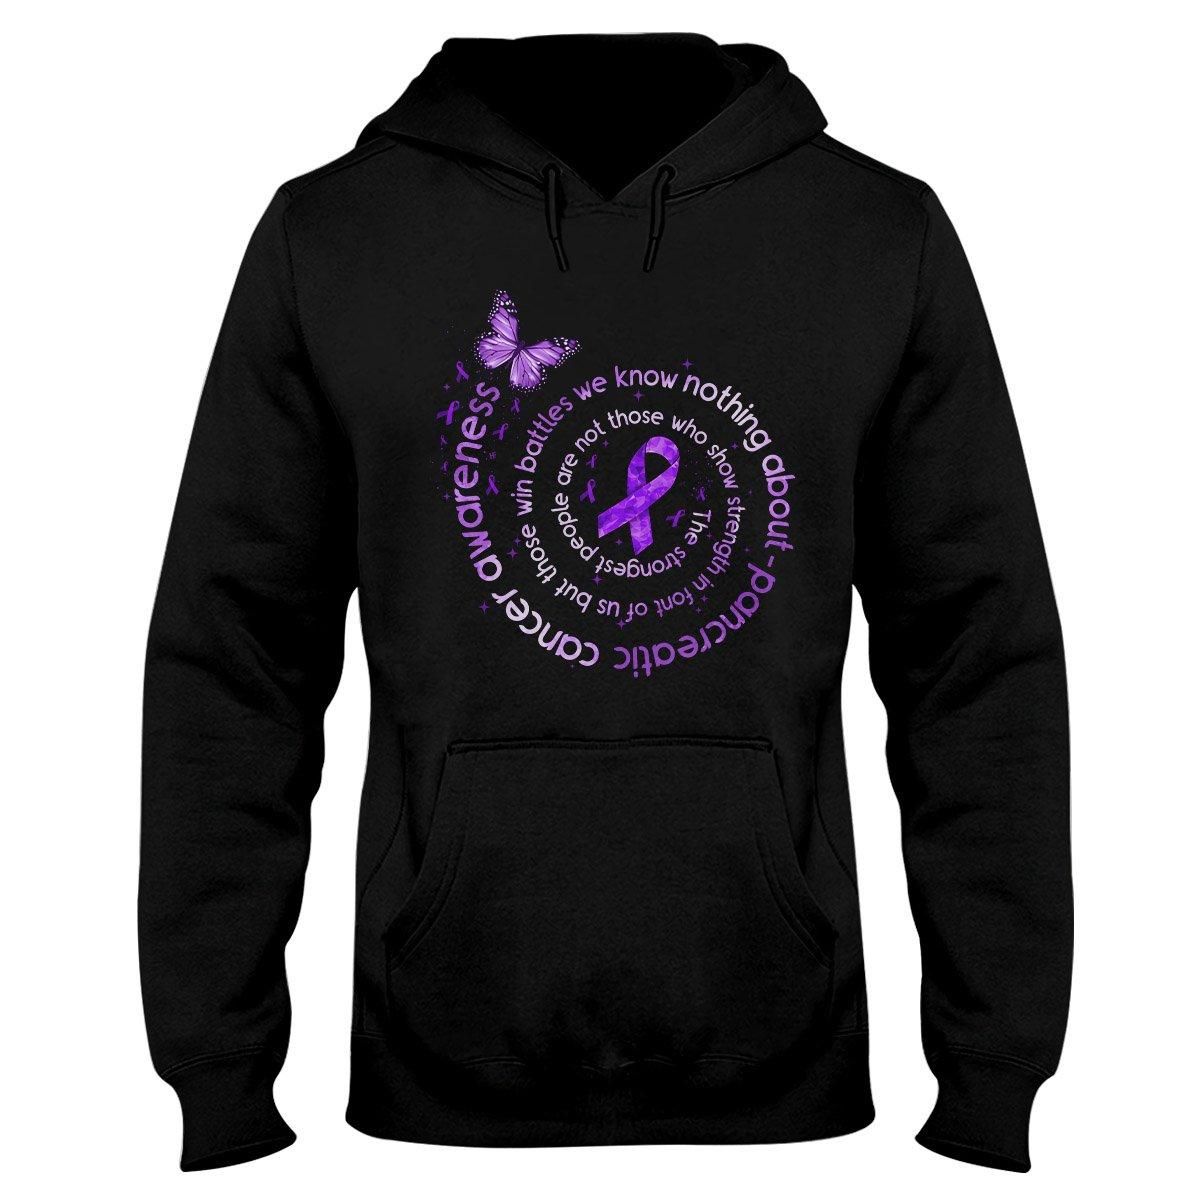 The Strongest People Are Not Those Who Show Strength In Font Of Us Pancreatic Cancer Awareness EZ24 2912 Hoodie